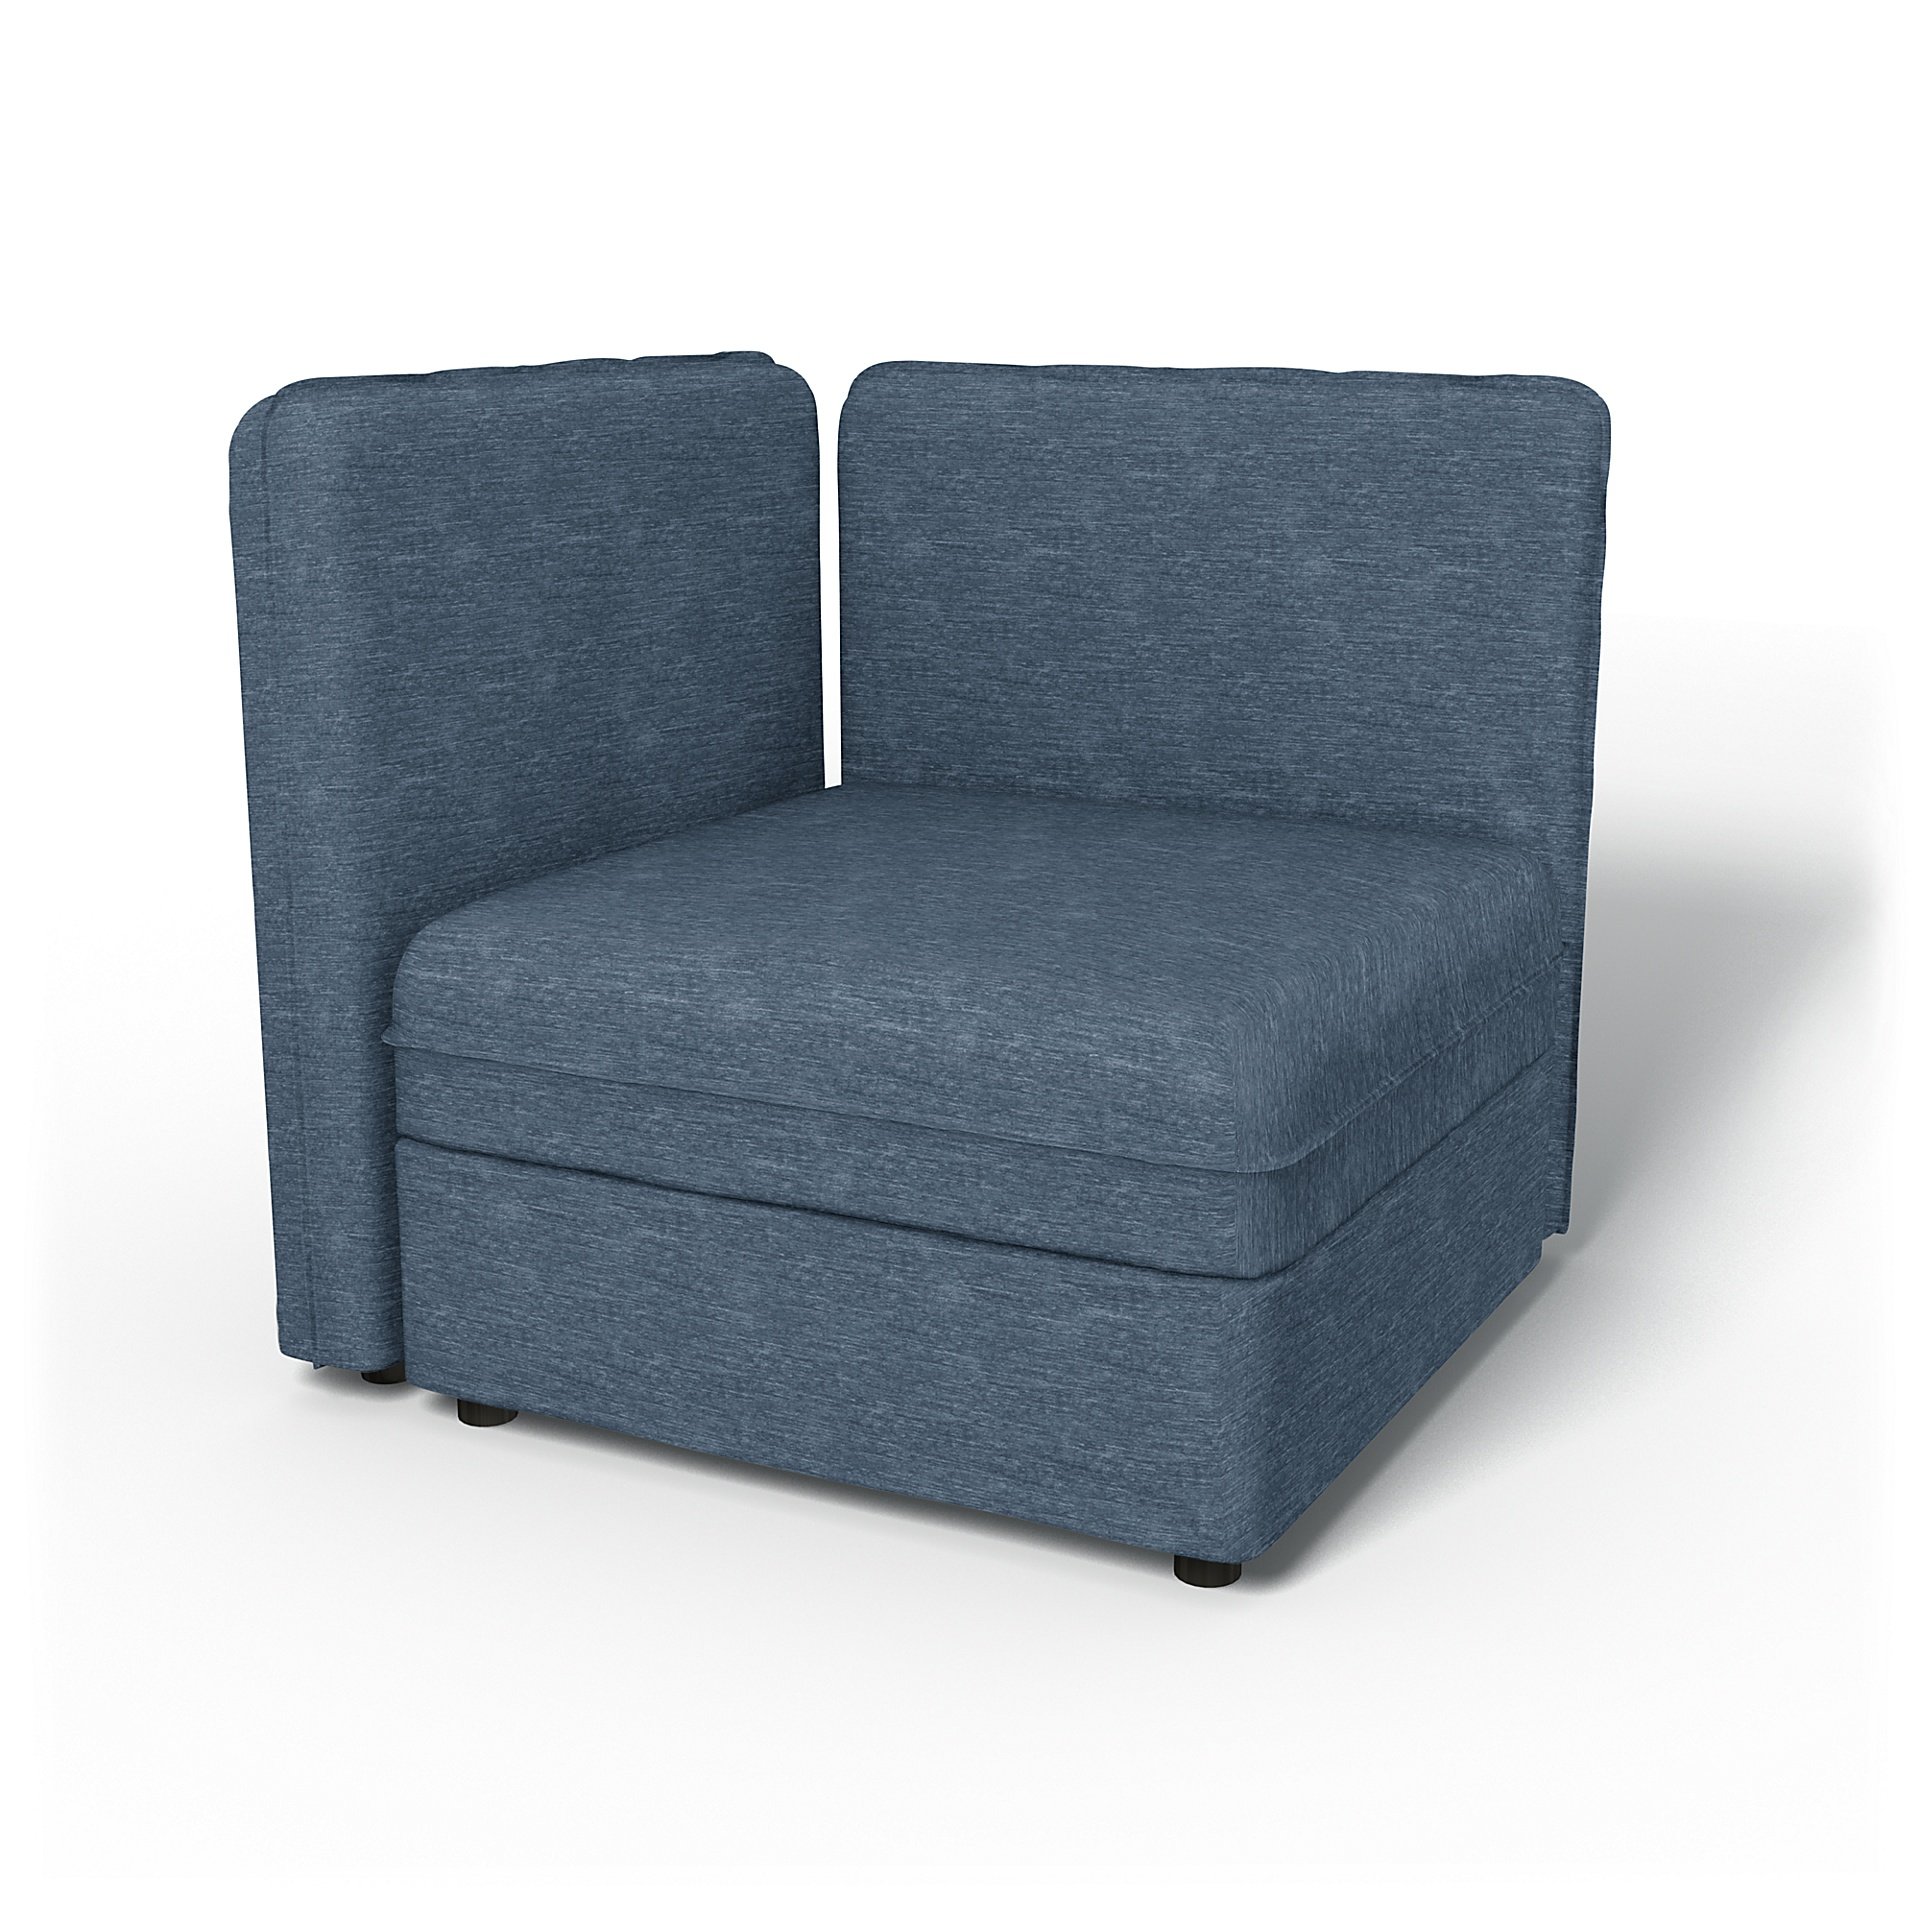 IKEA - Vallentuna Seat Module with Low Back and Storage Cover 80x80cm 32x32in, Mineral Blue, Velvet 